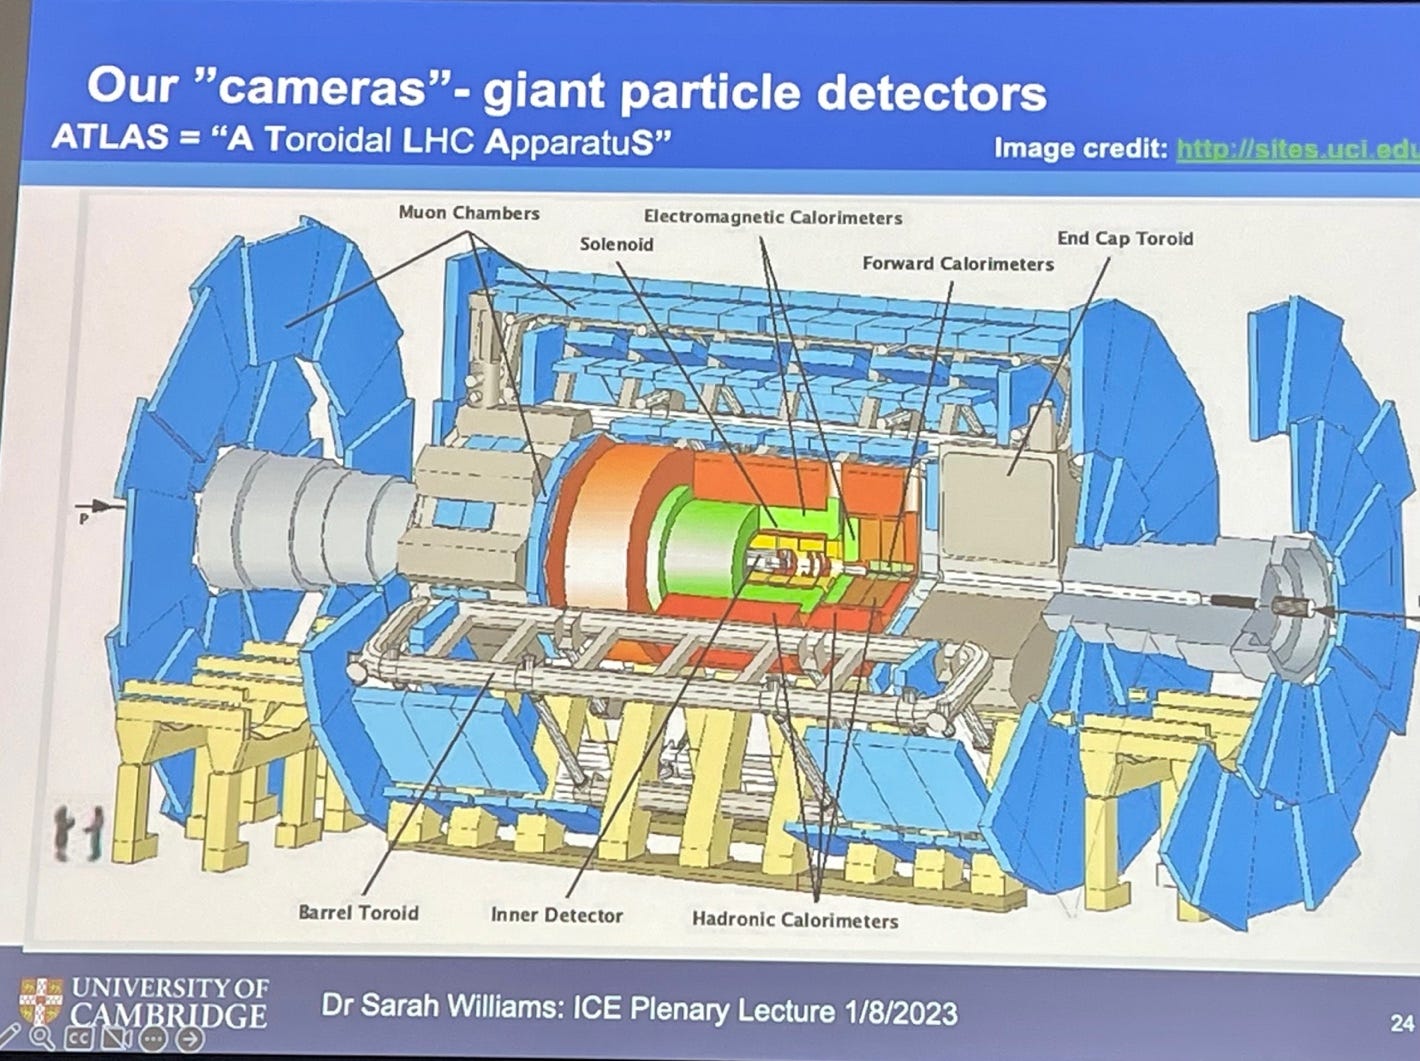 A diagram of a large particle detector

Description automatically generated